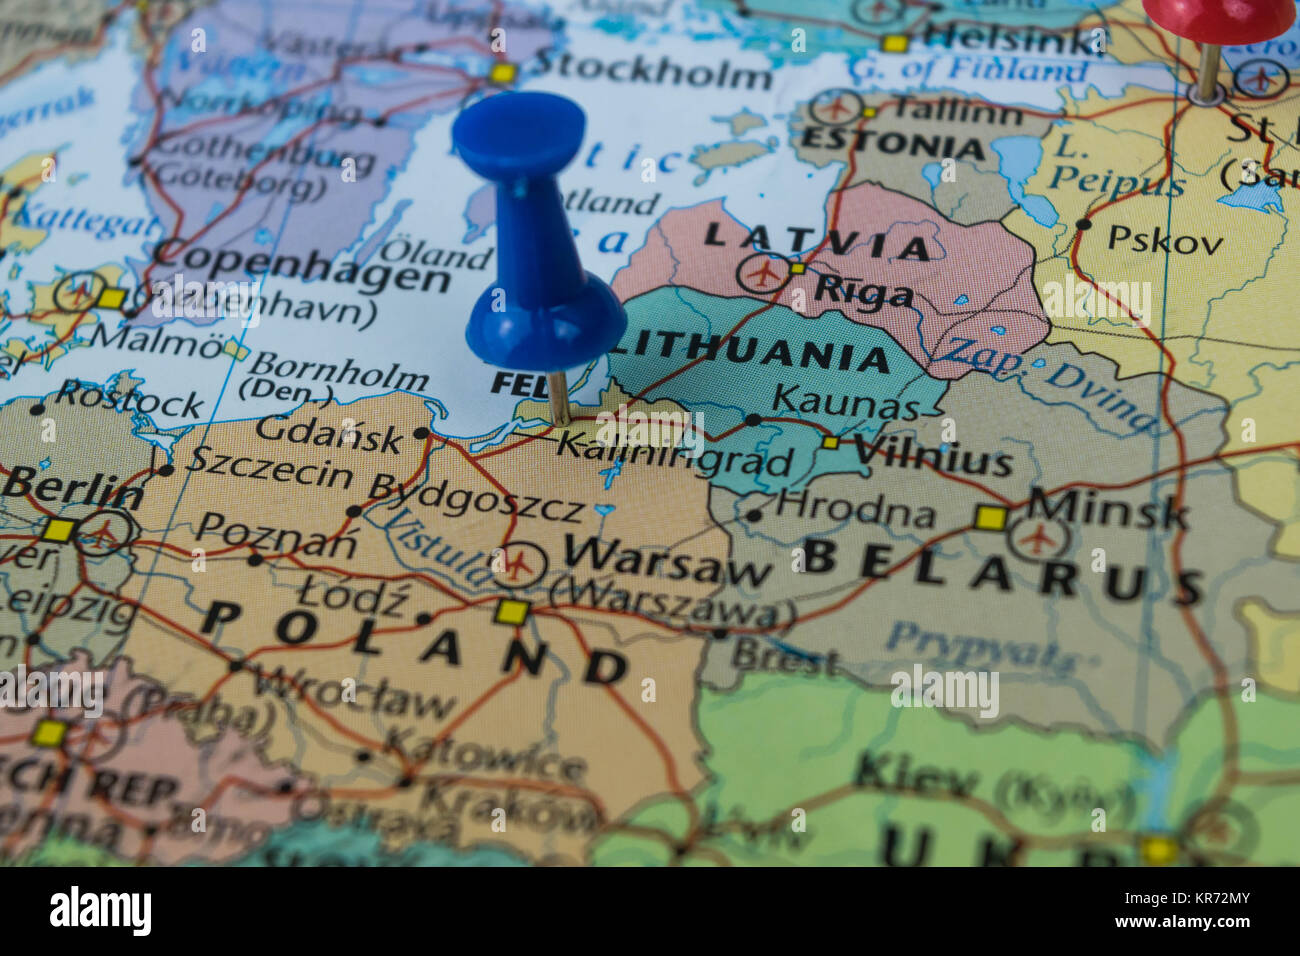 Kaliningrad city pinned on a map of Russia among other World cup 2018 venues Stock Photo